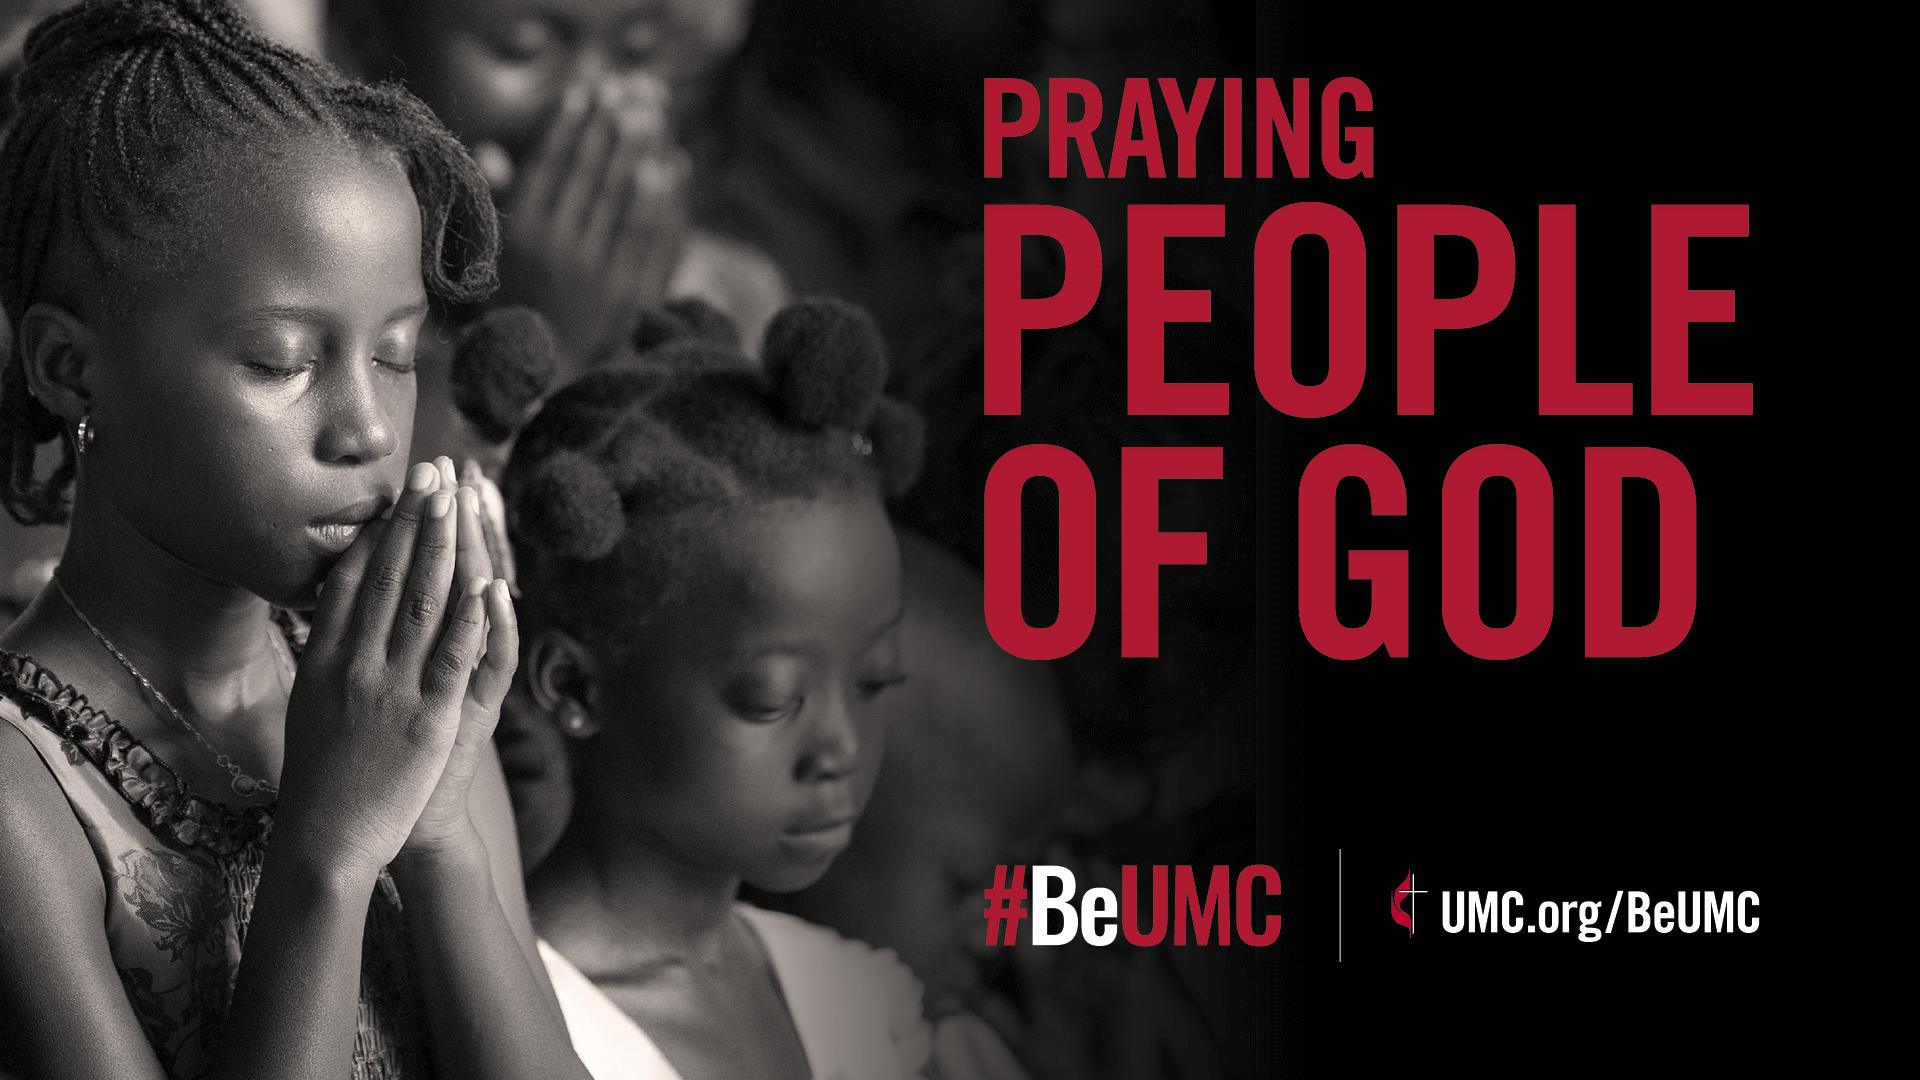 The #BeUMC campaign reminds us of who we are at our best. As people of God called The United Methodist Church, we’re faithful followers of Jesus seeking to make the world a better place. Praying (girl), worship graphic.